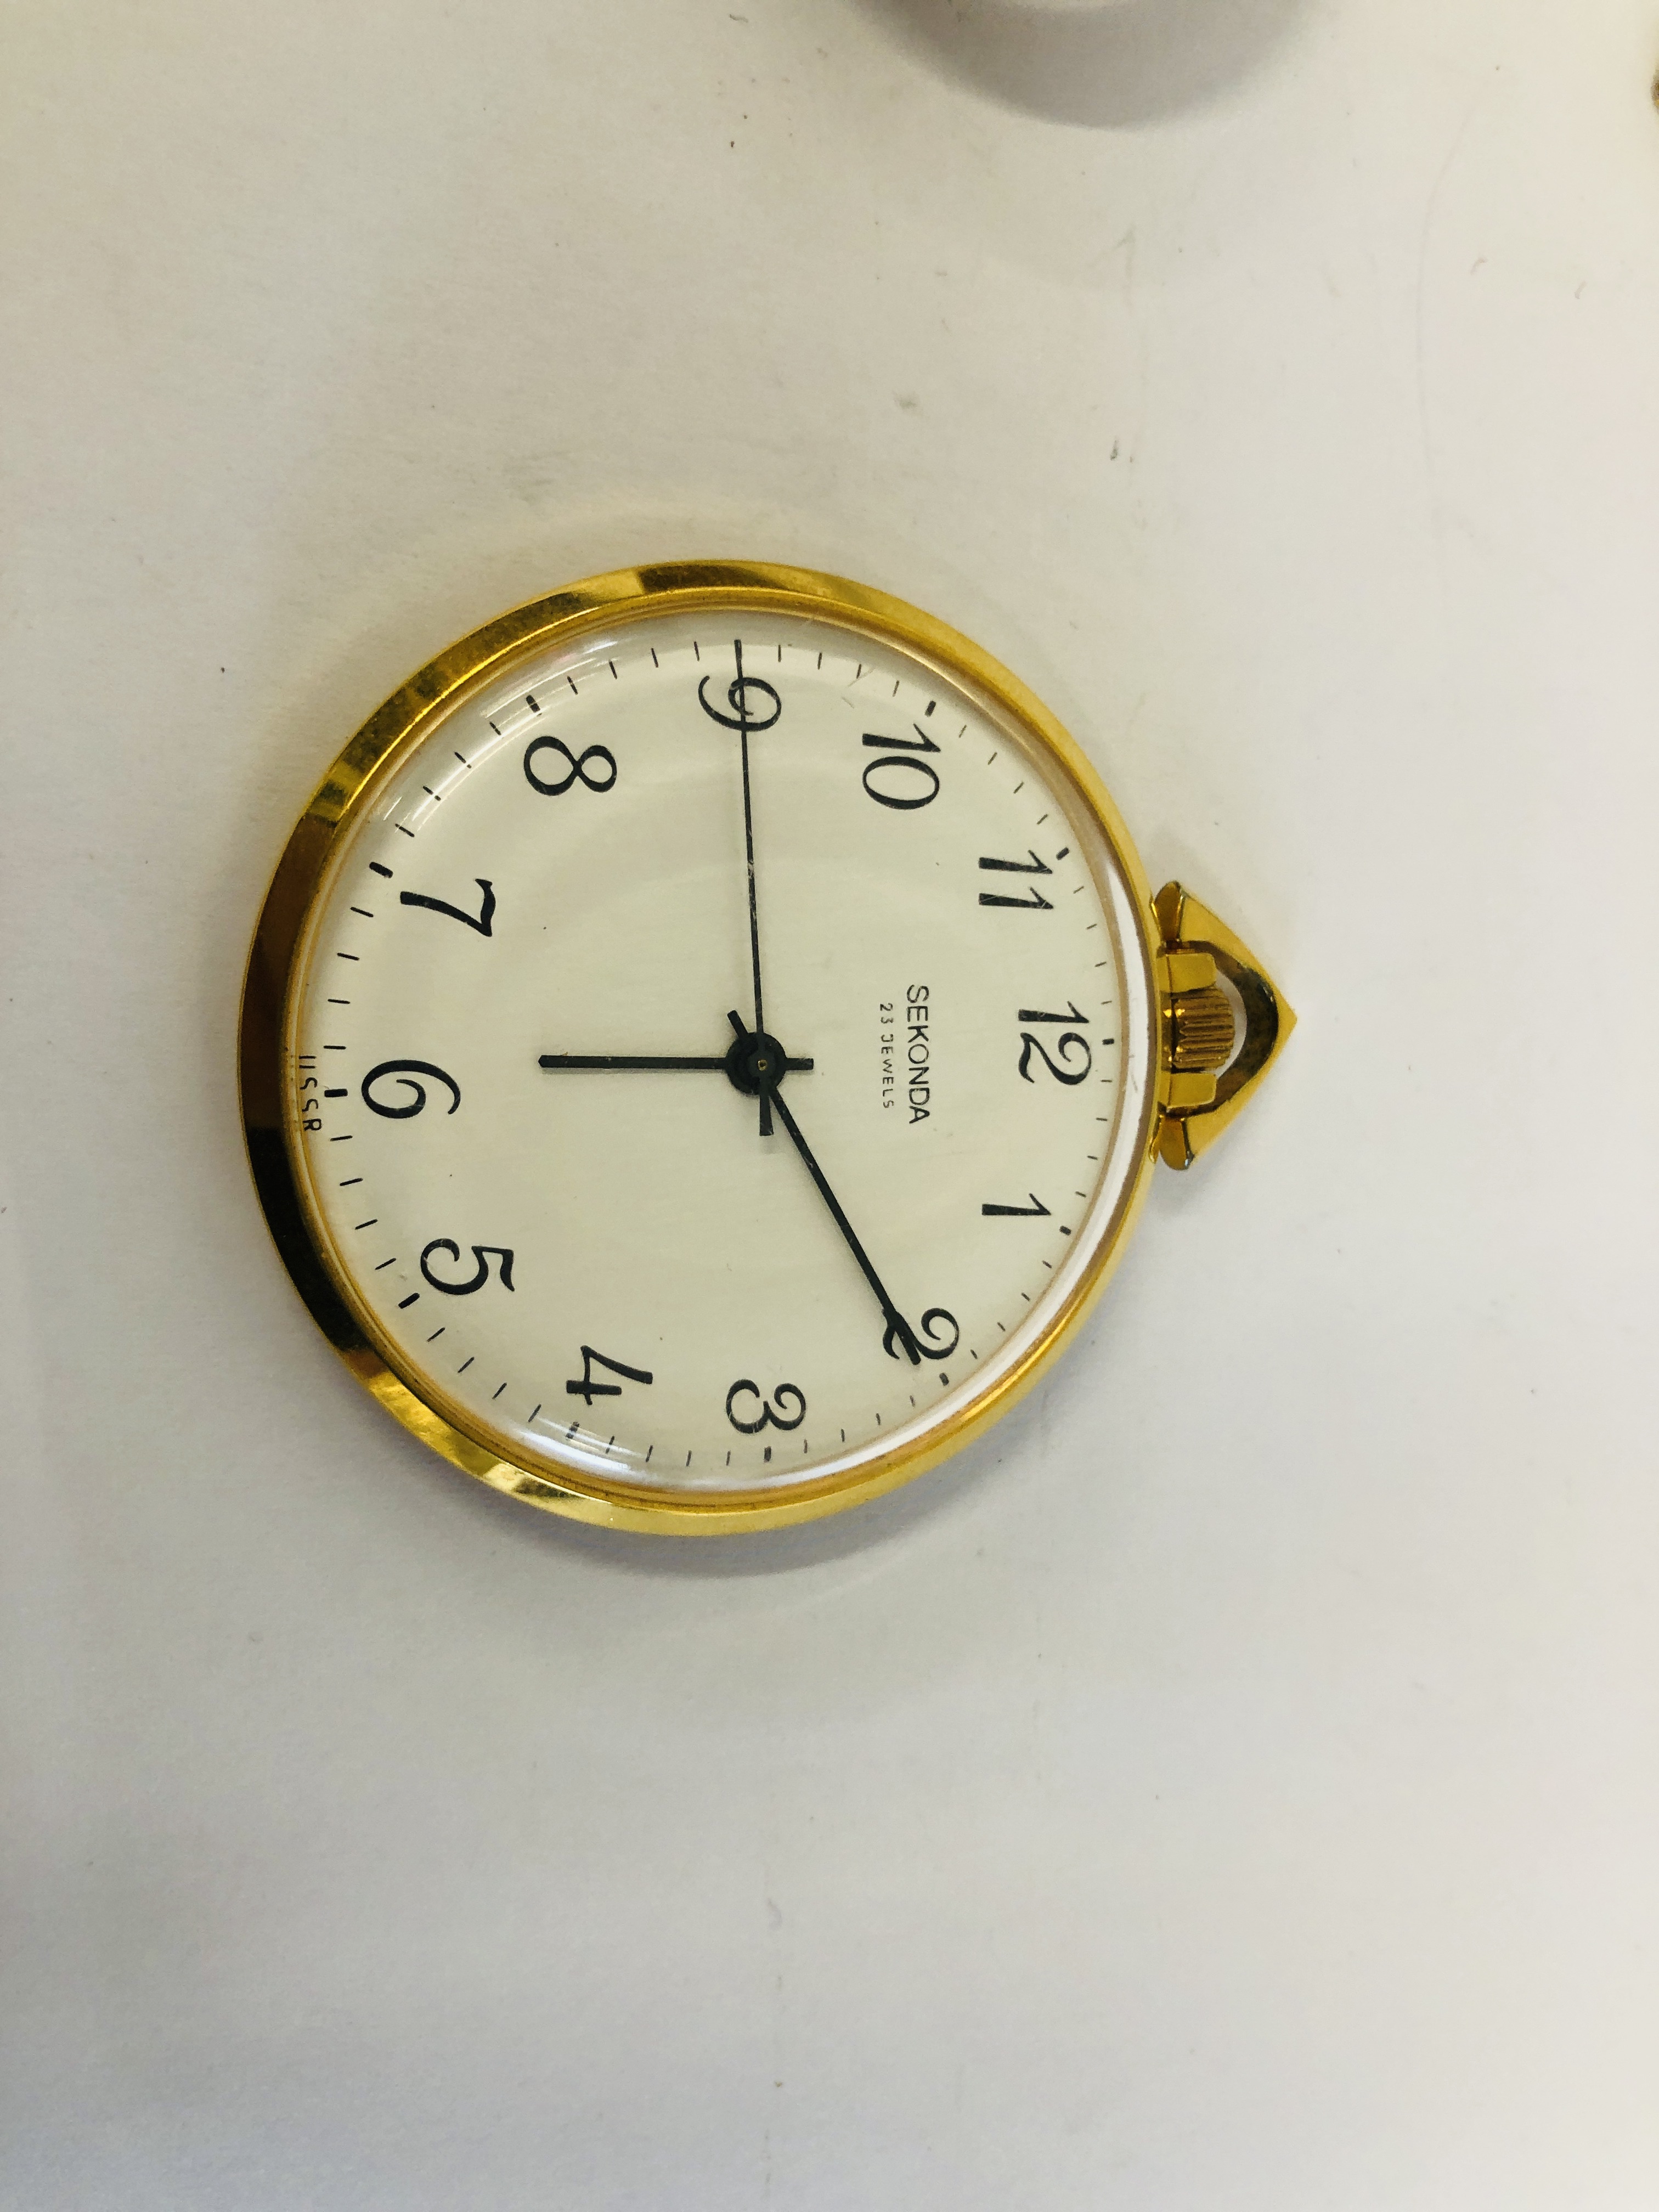 A GENTLEMANS SEKONDA POCKET WATCH WITH 23 JEWEL MOVEMENT (NO CURRENTLY RUNNING) - Image 5 of 7